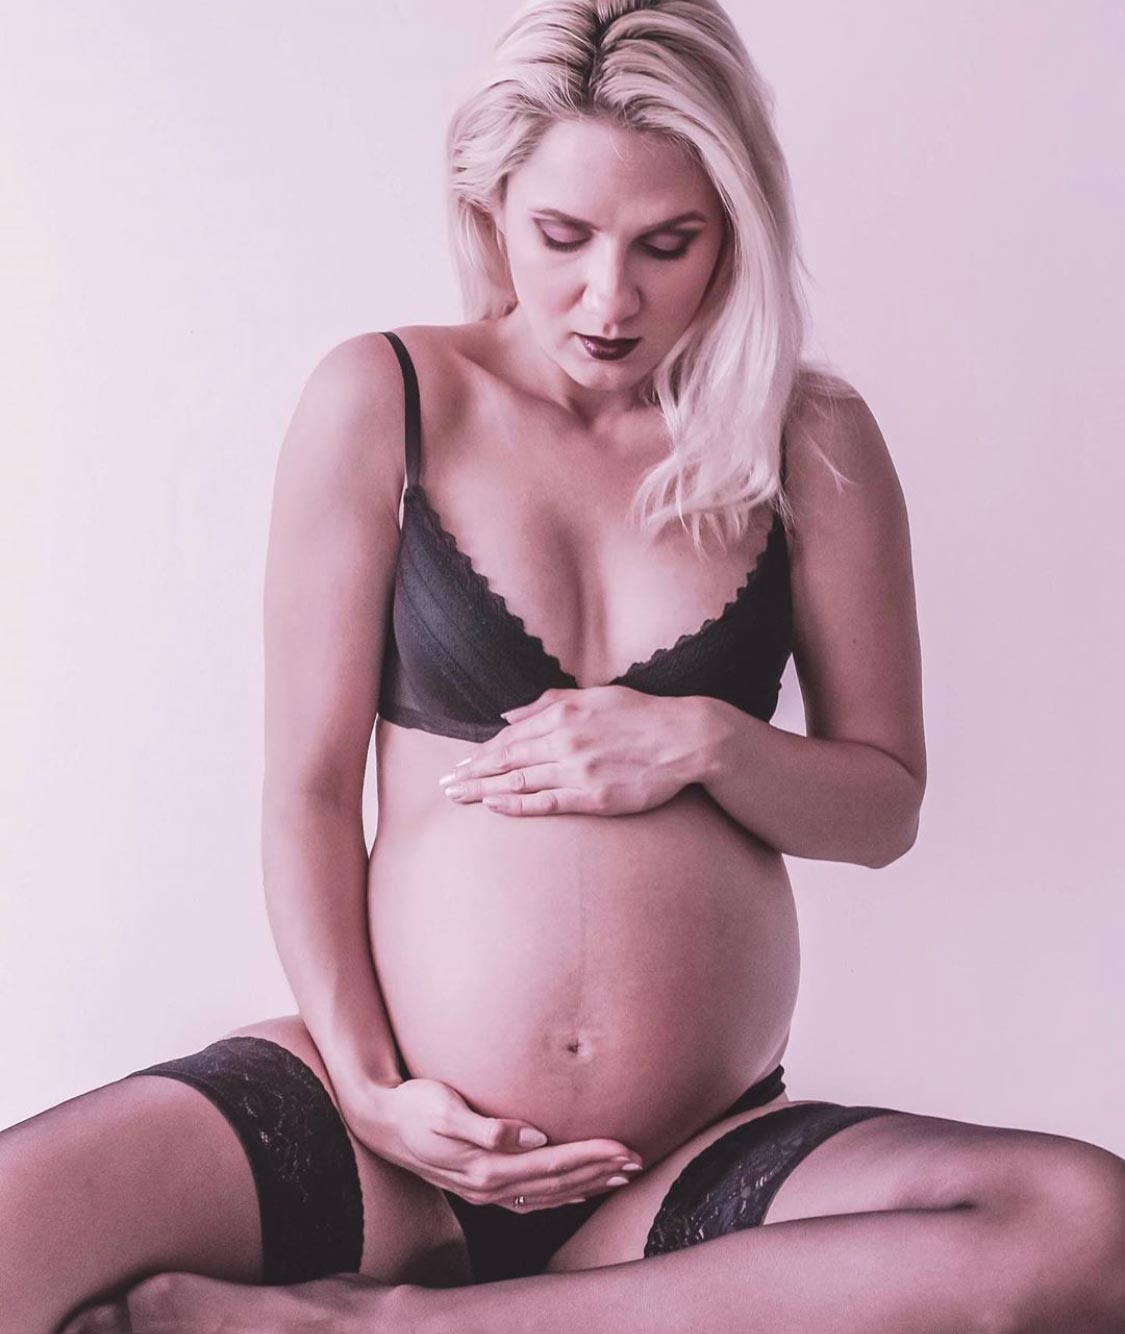 Maternity tights, stockings and more